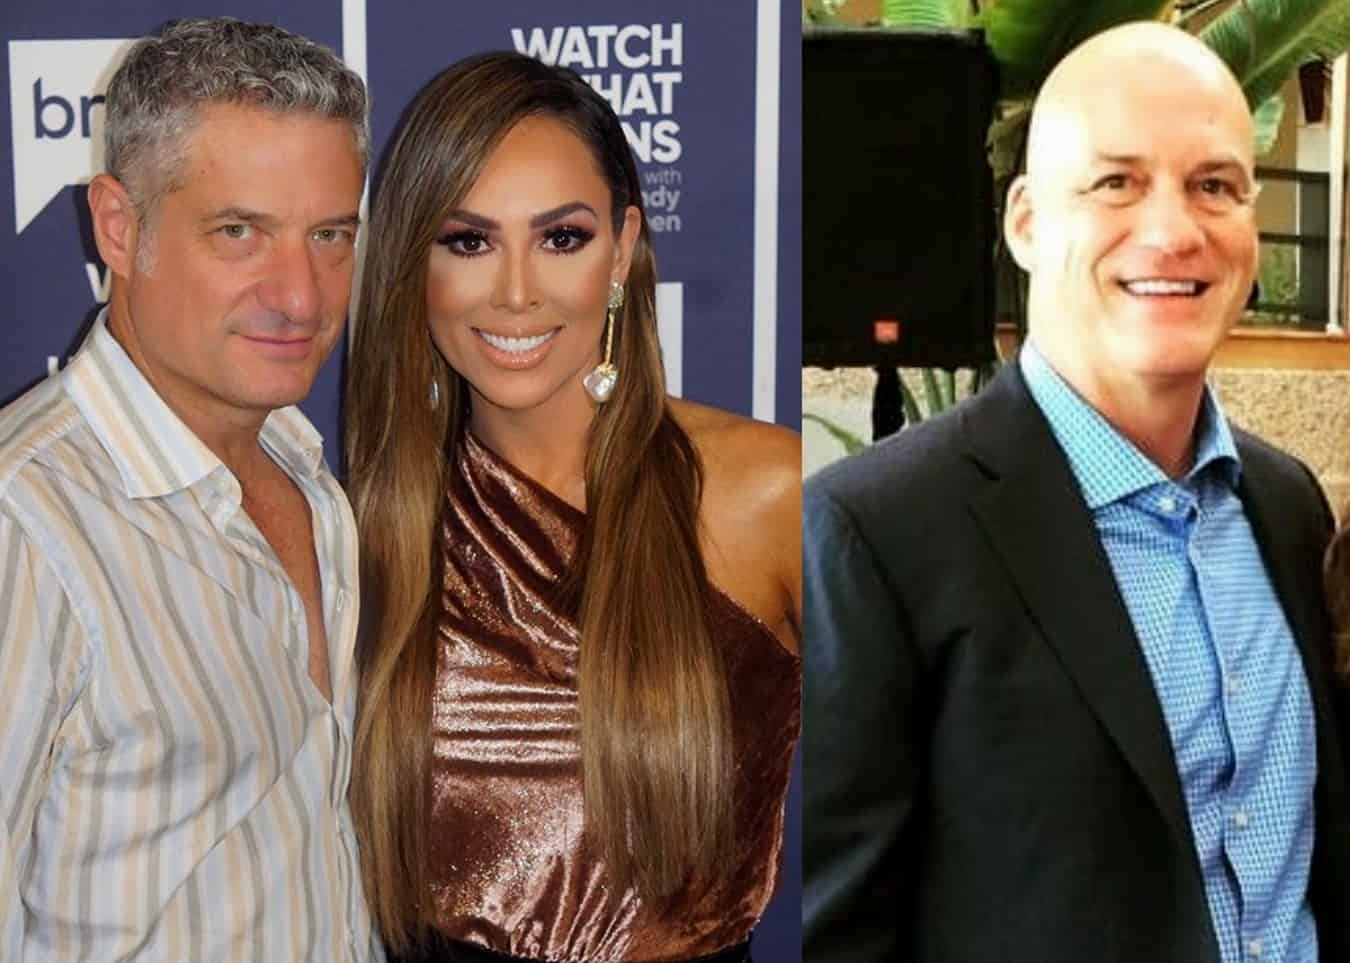 RHOC's Kelly Dodd Accuses Ex Michael Dodd of Threatening to 'Expose' Her After Rick Leventhal Engagement and Reveals What Role Ramona Singer Wants in Her Wedding, Plus is She Joining RHONY?